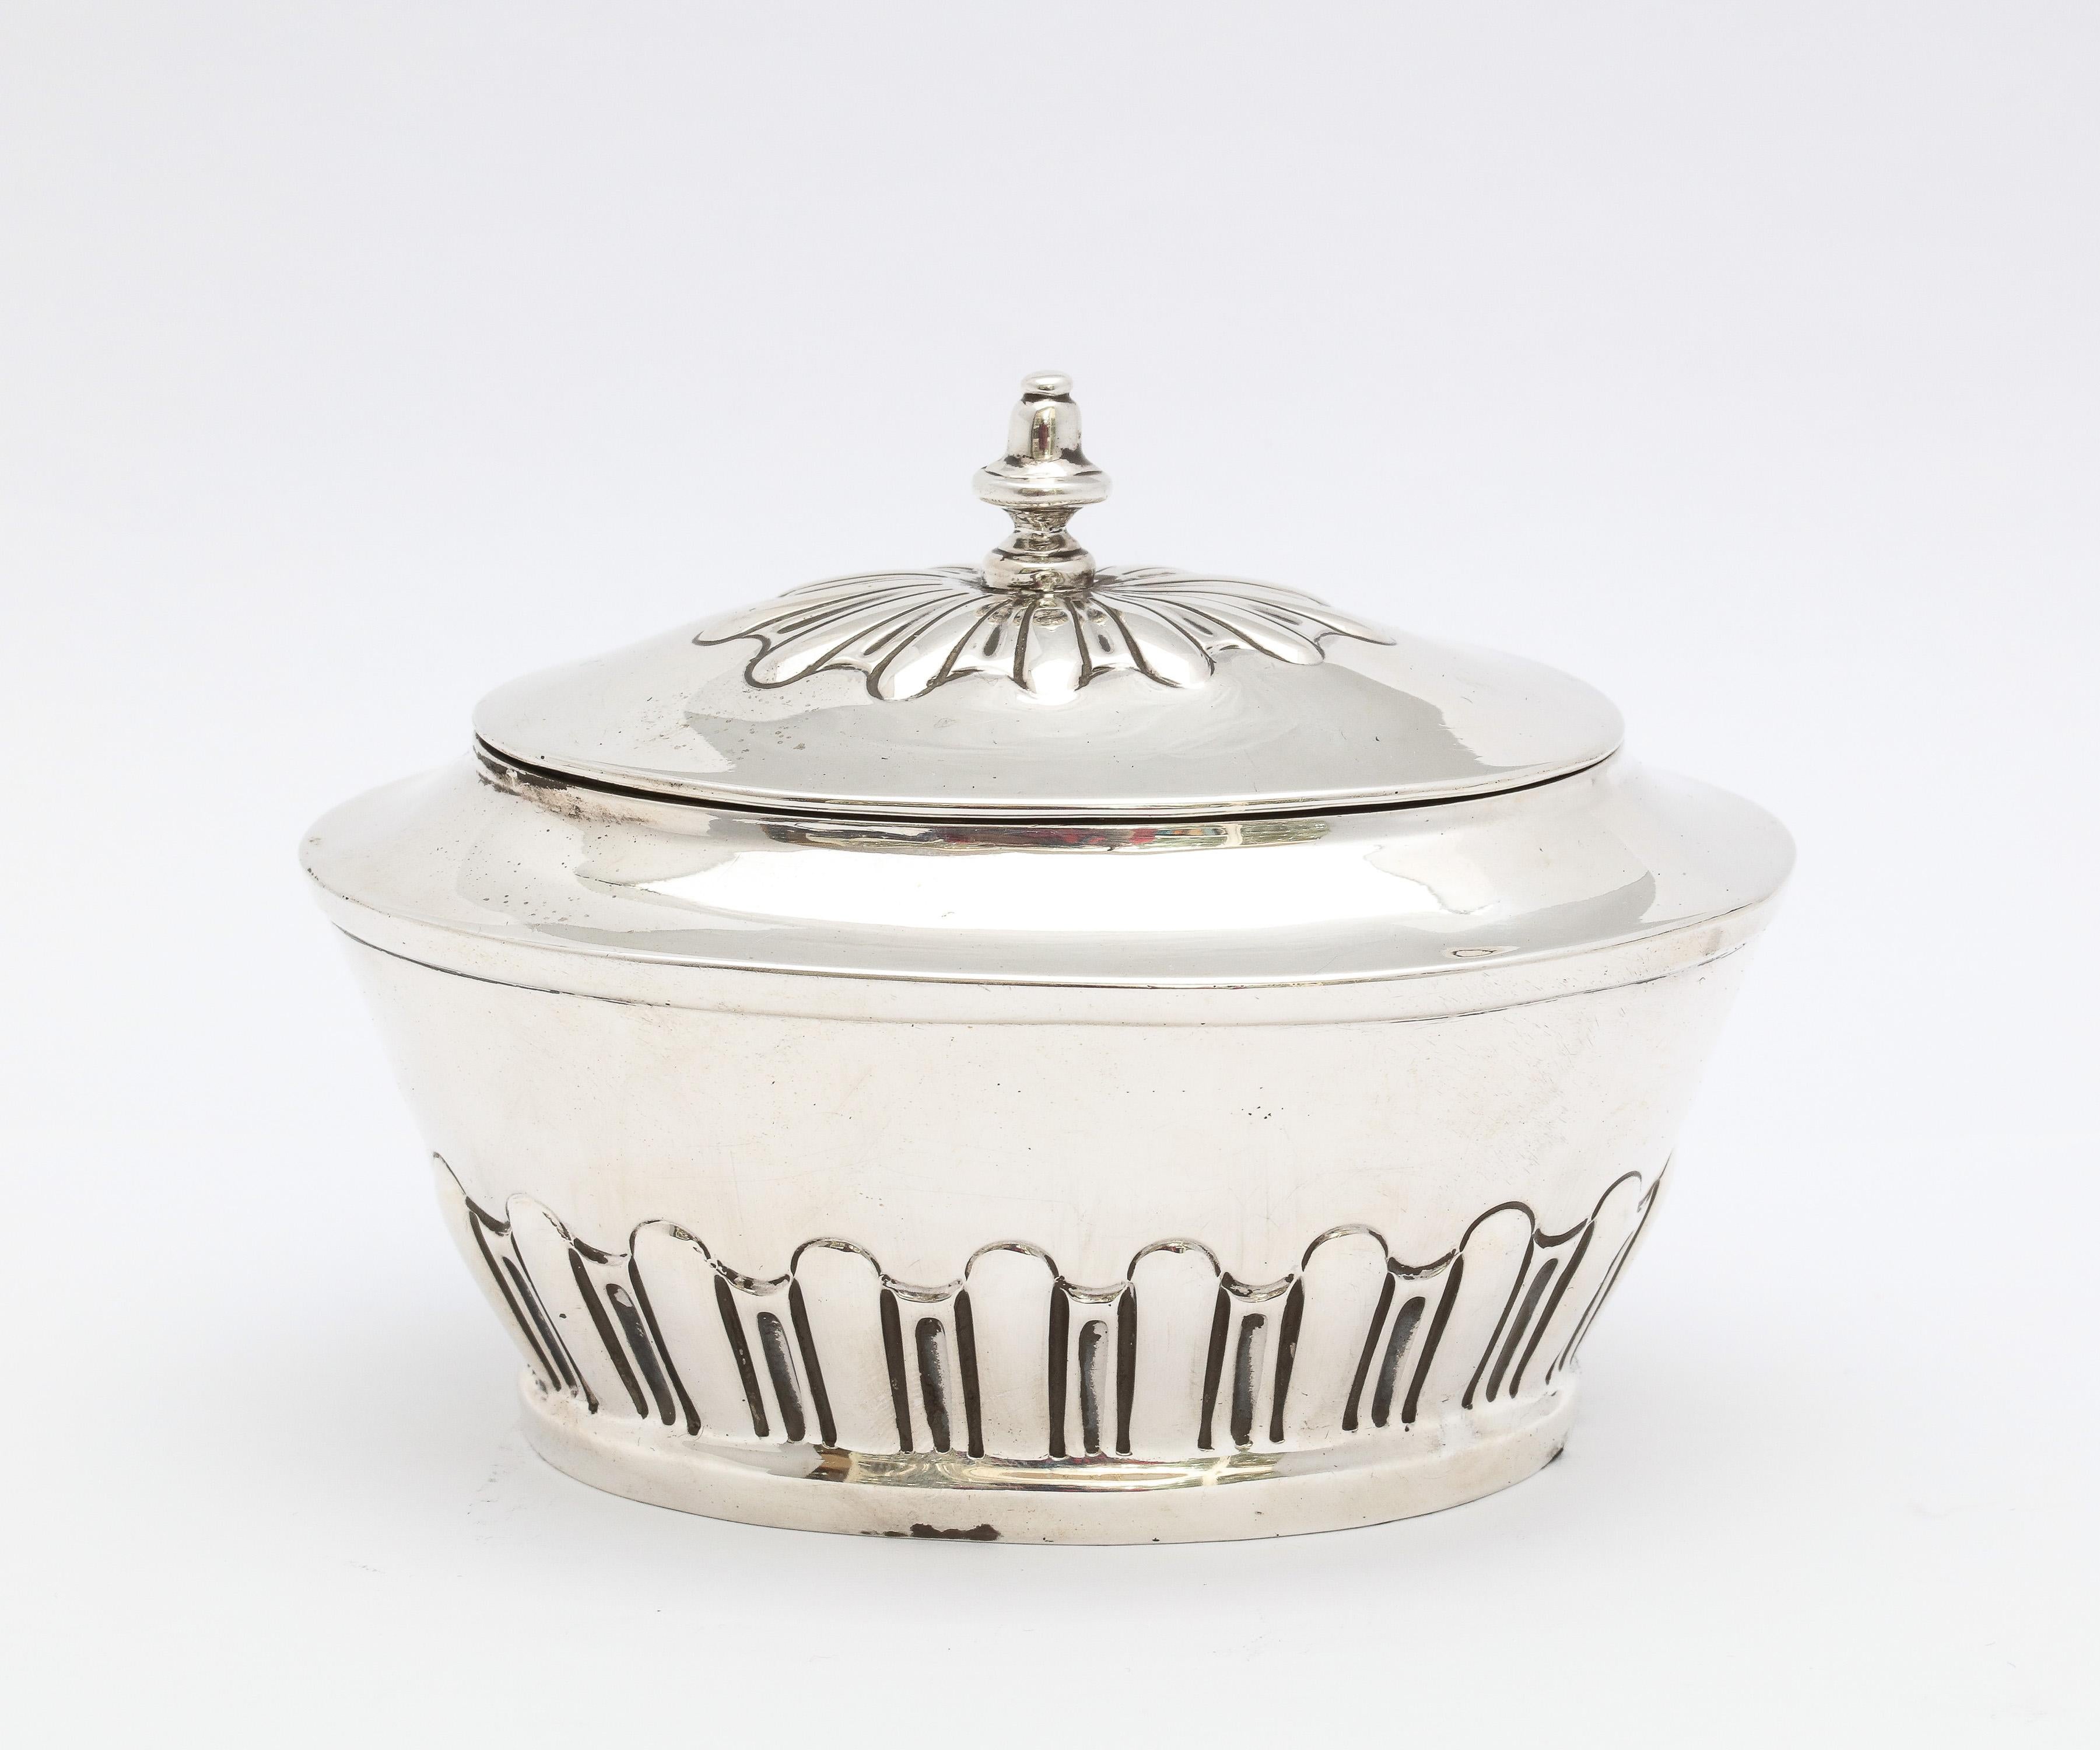 Edwardian Period, sterling silver tea caddy with hinged lid and gilt interior, London, year-hallmarked for 1908, Pairpoint Brothers - makers. Measures 3 1/2 inches high (to top of finial) x 4 1/2 inches wide x 3 inches deep. Weighs 3.1510 troy